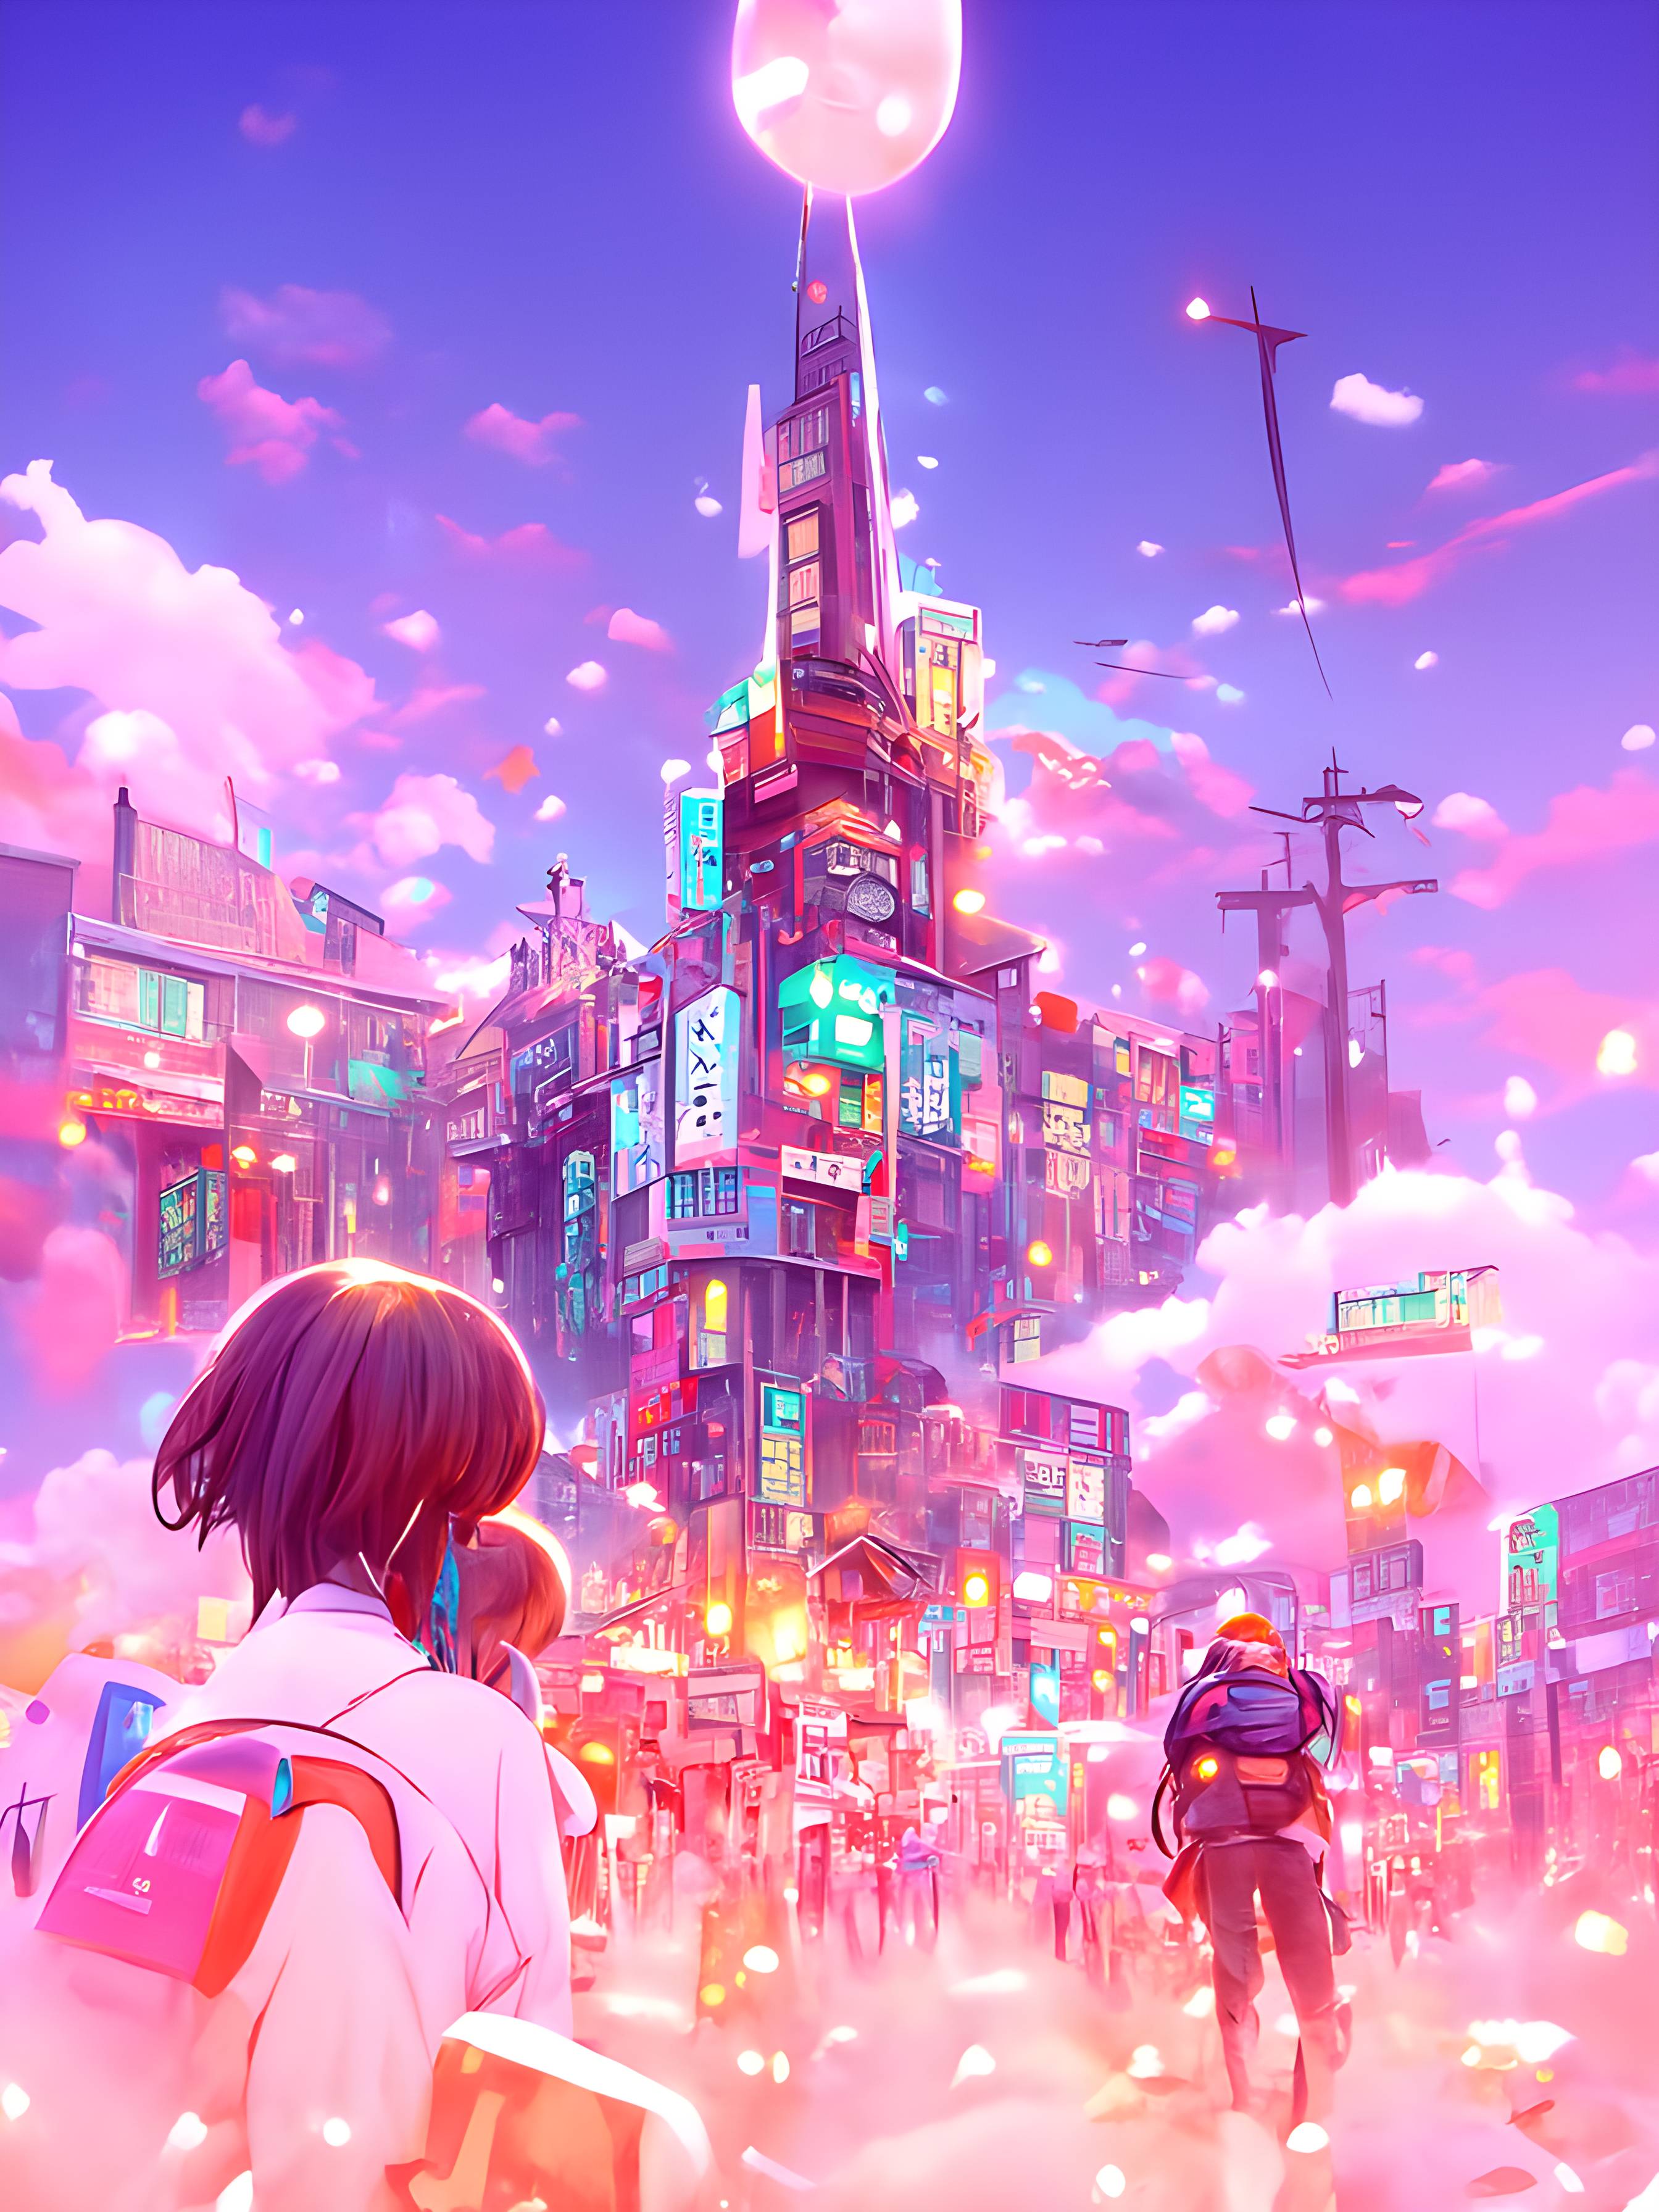 A neon pink geometric cityscape in an anime style. A girl is walking towards the city. The central skyscraper looks like it reaches up towards the moon.